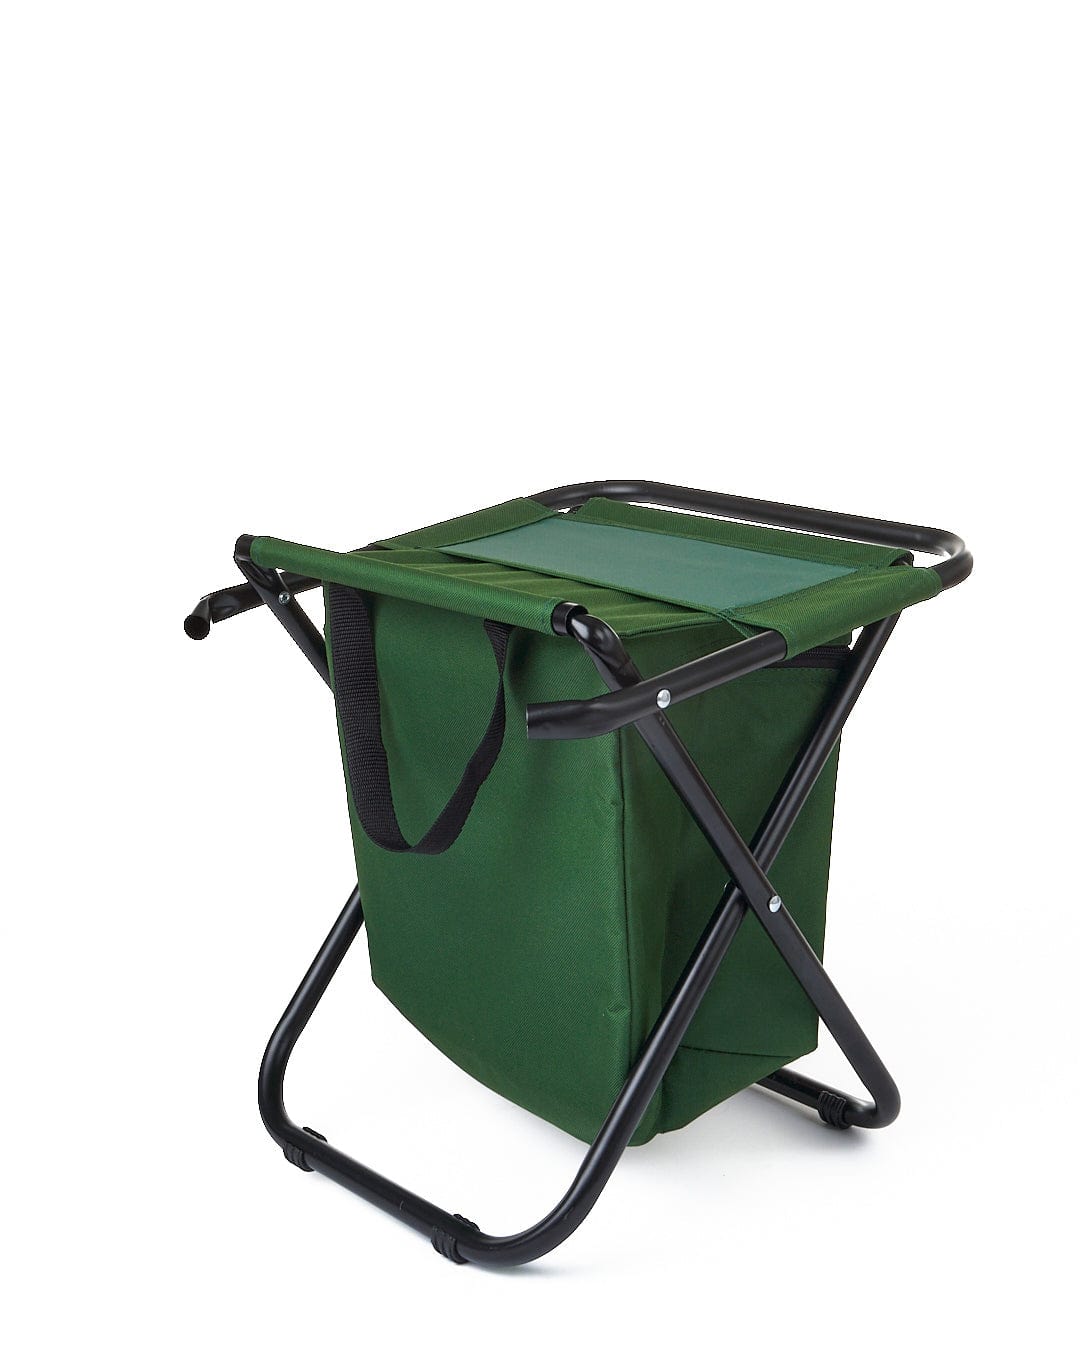 Spectator - Foldable Chair with Cooler Bag - Dark Green